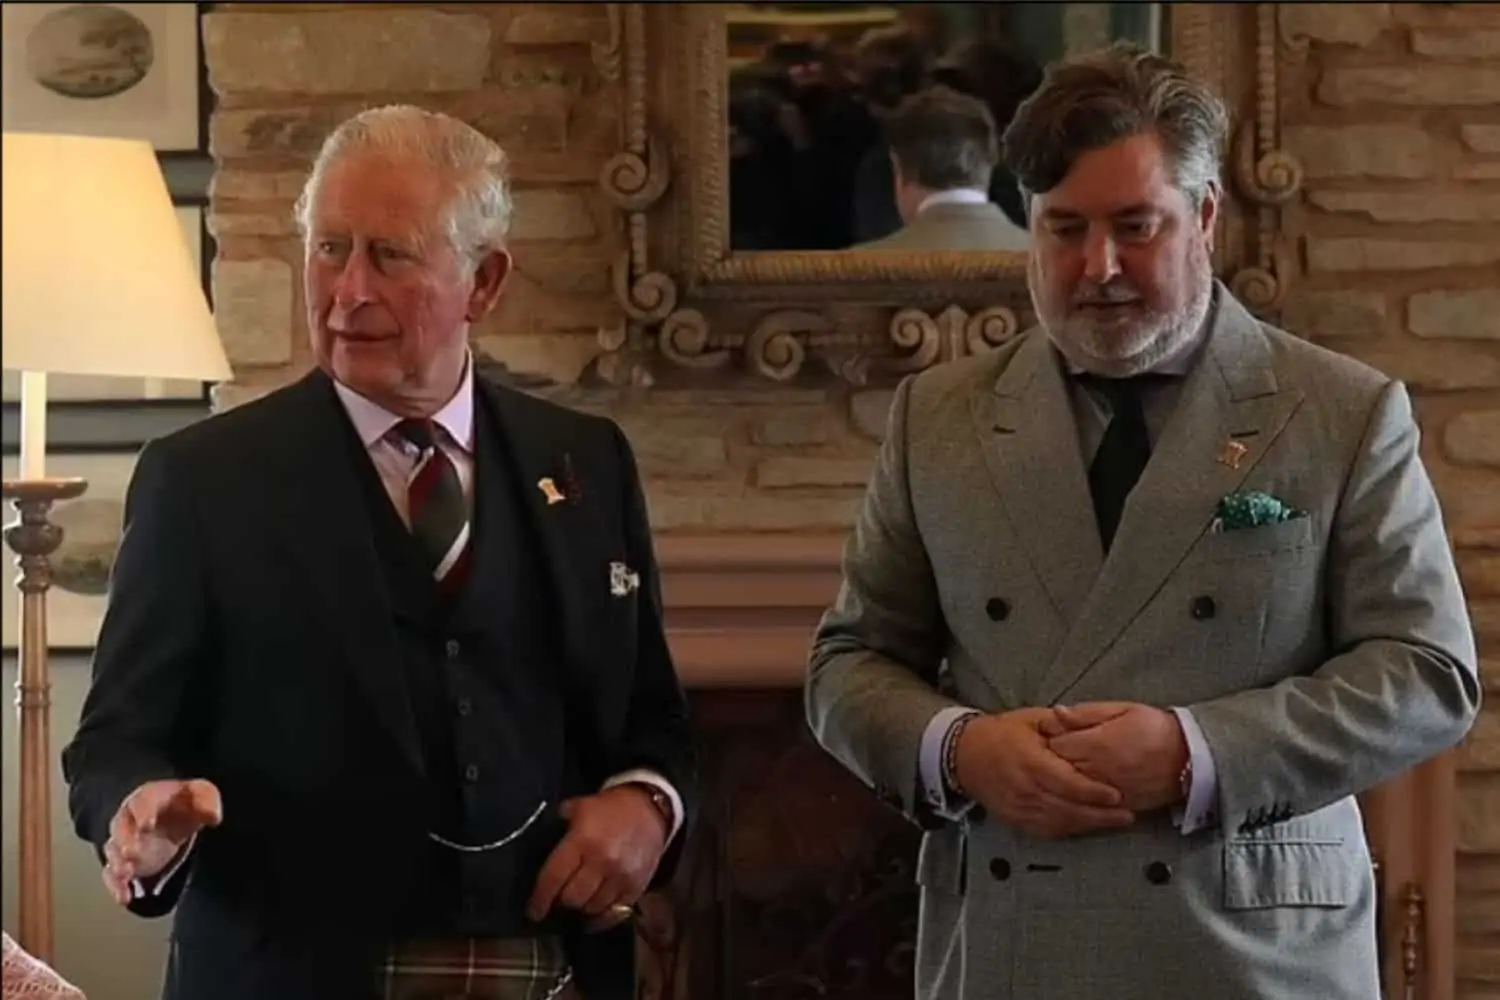 Prince Charles's closest confidant resigns amid cash-for-honours claims